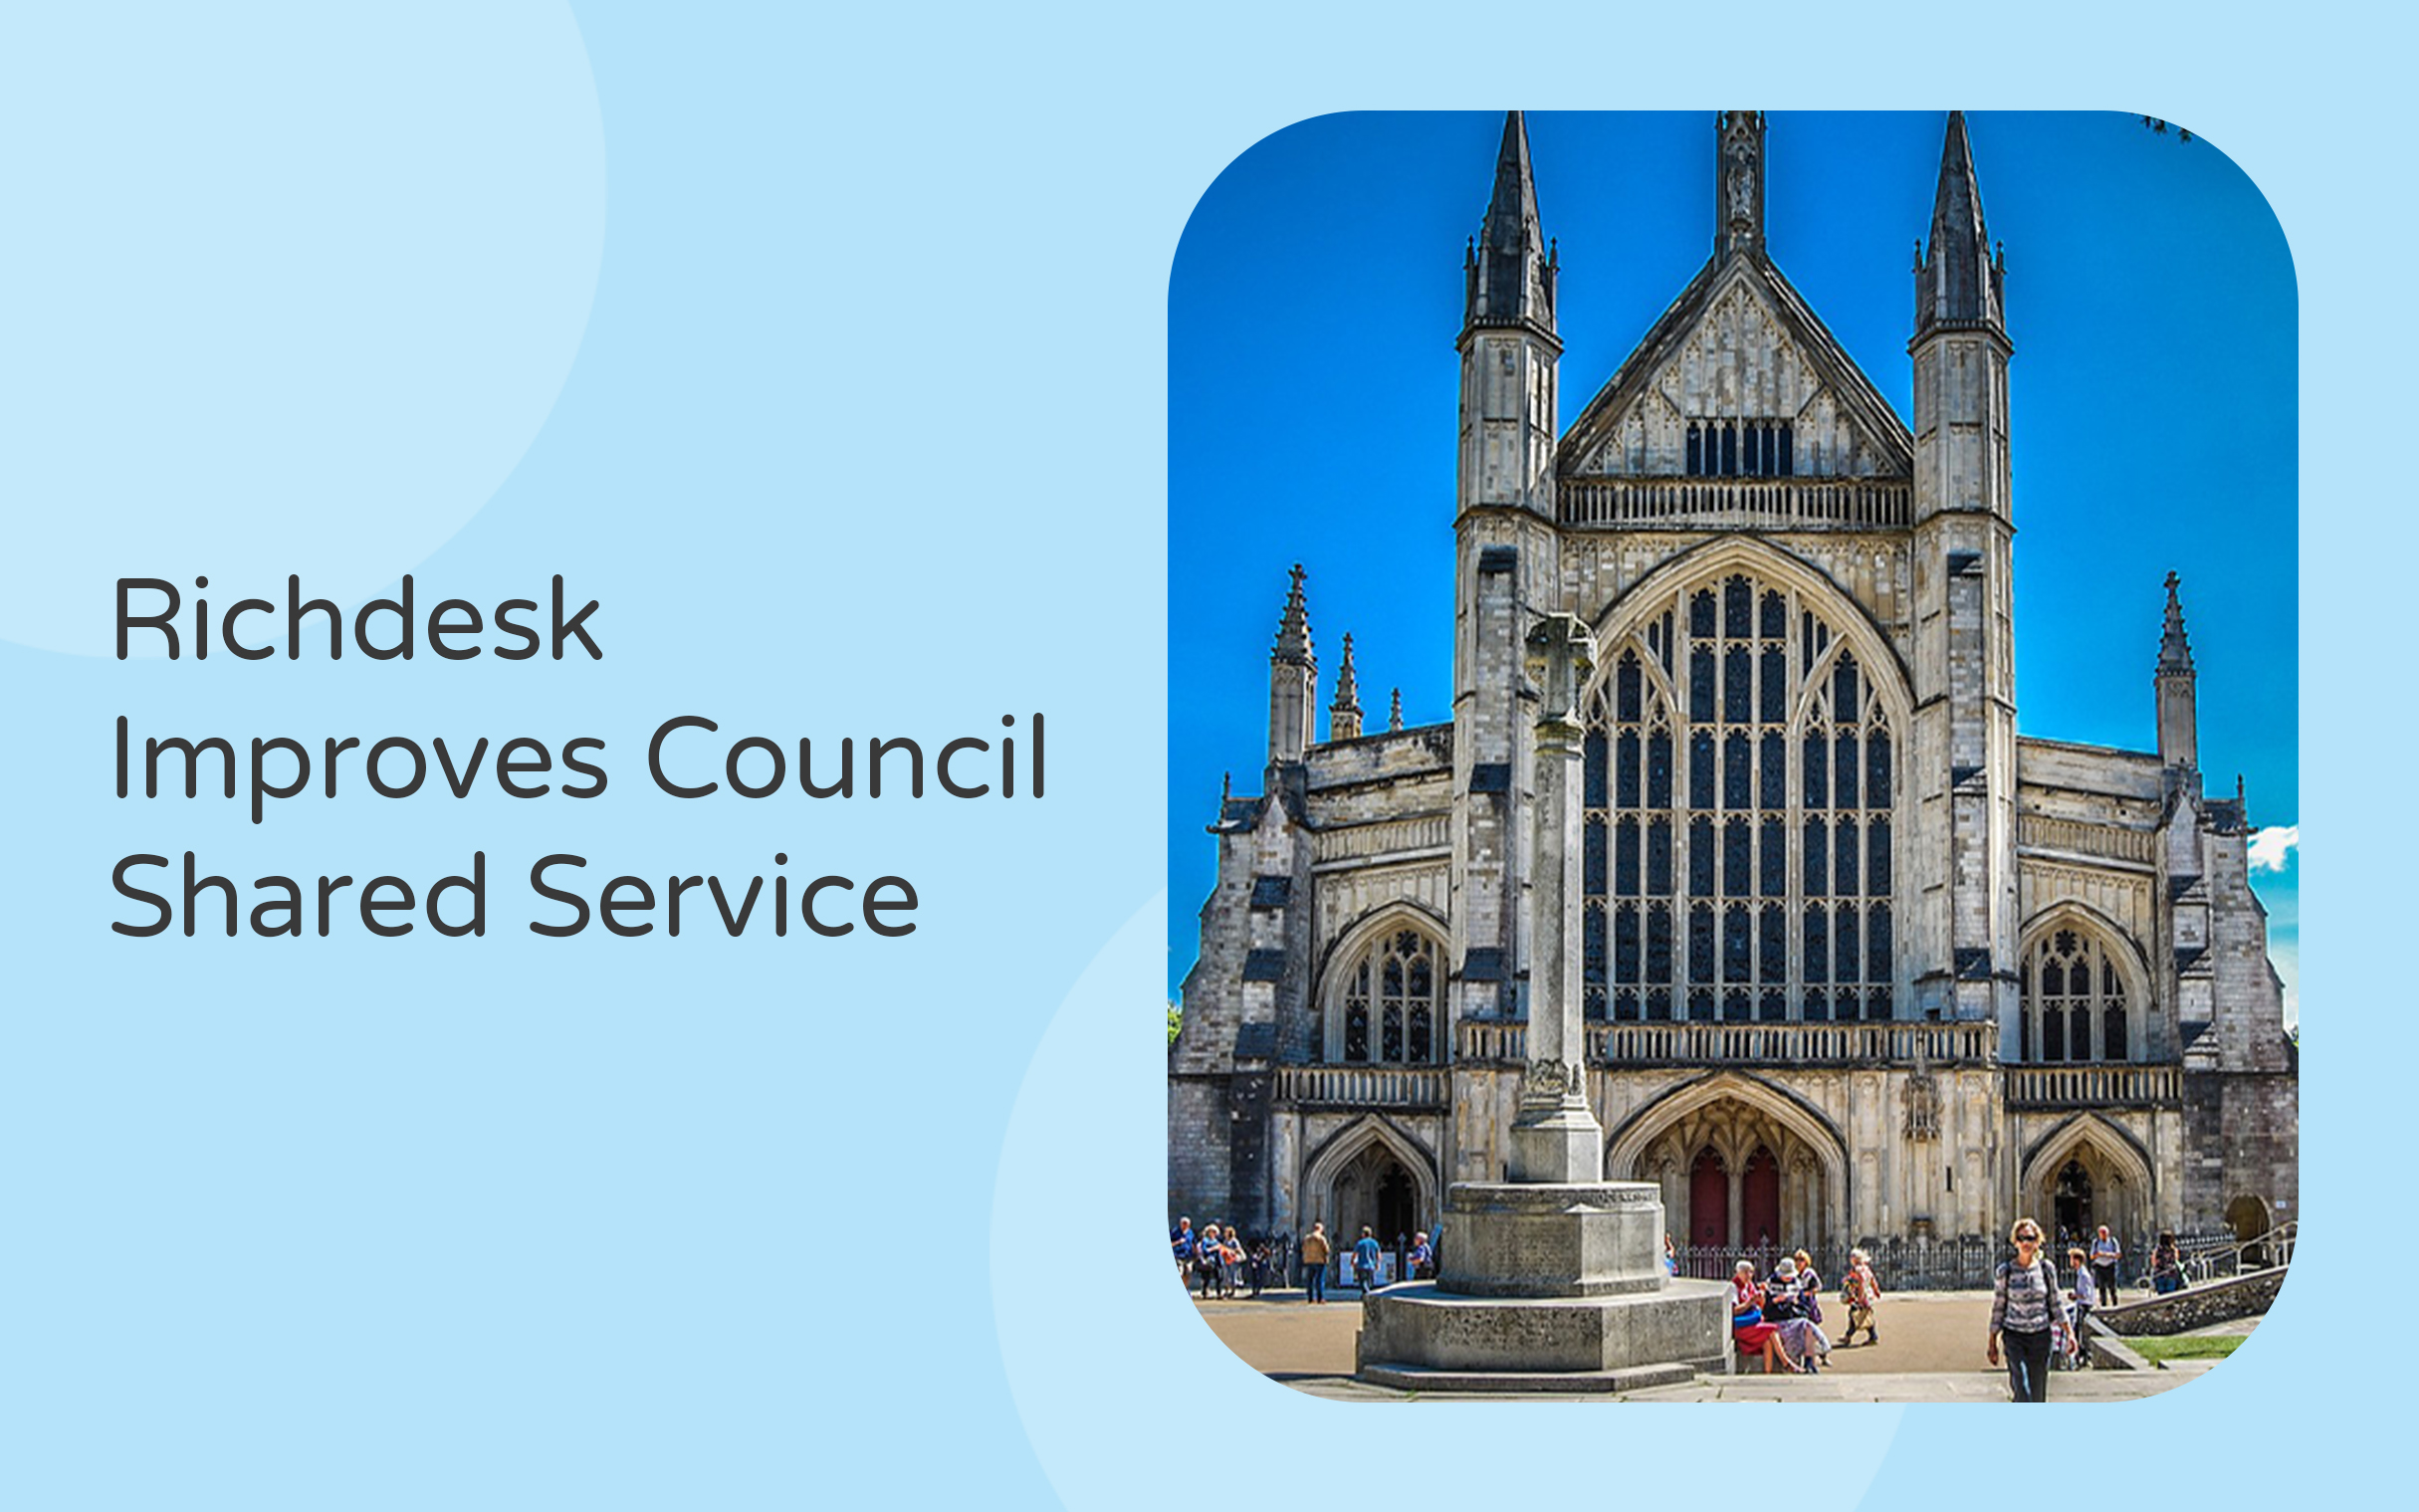 Richdesk Improves Council Shared Service